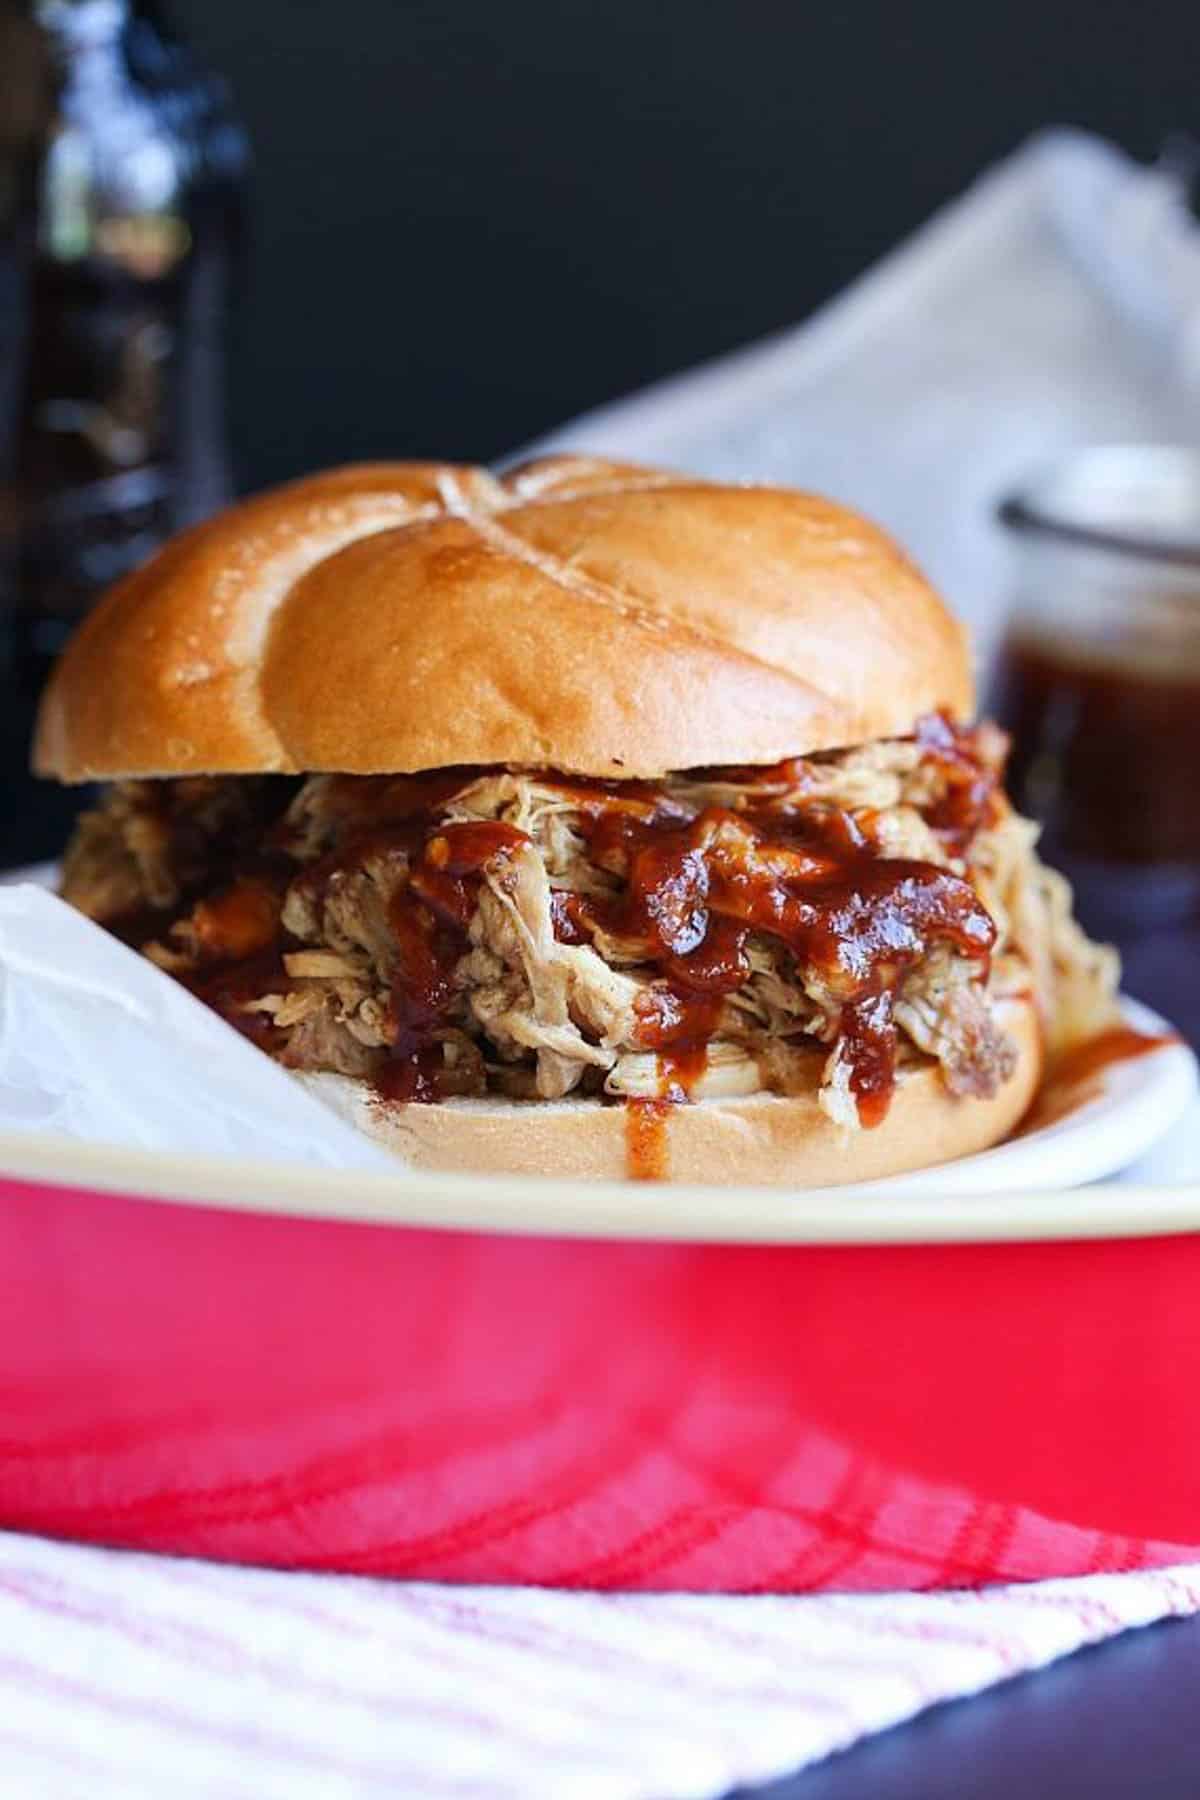 Root beer pulled pork sandwich on a red serving tray